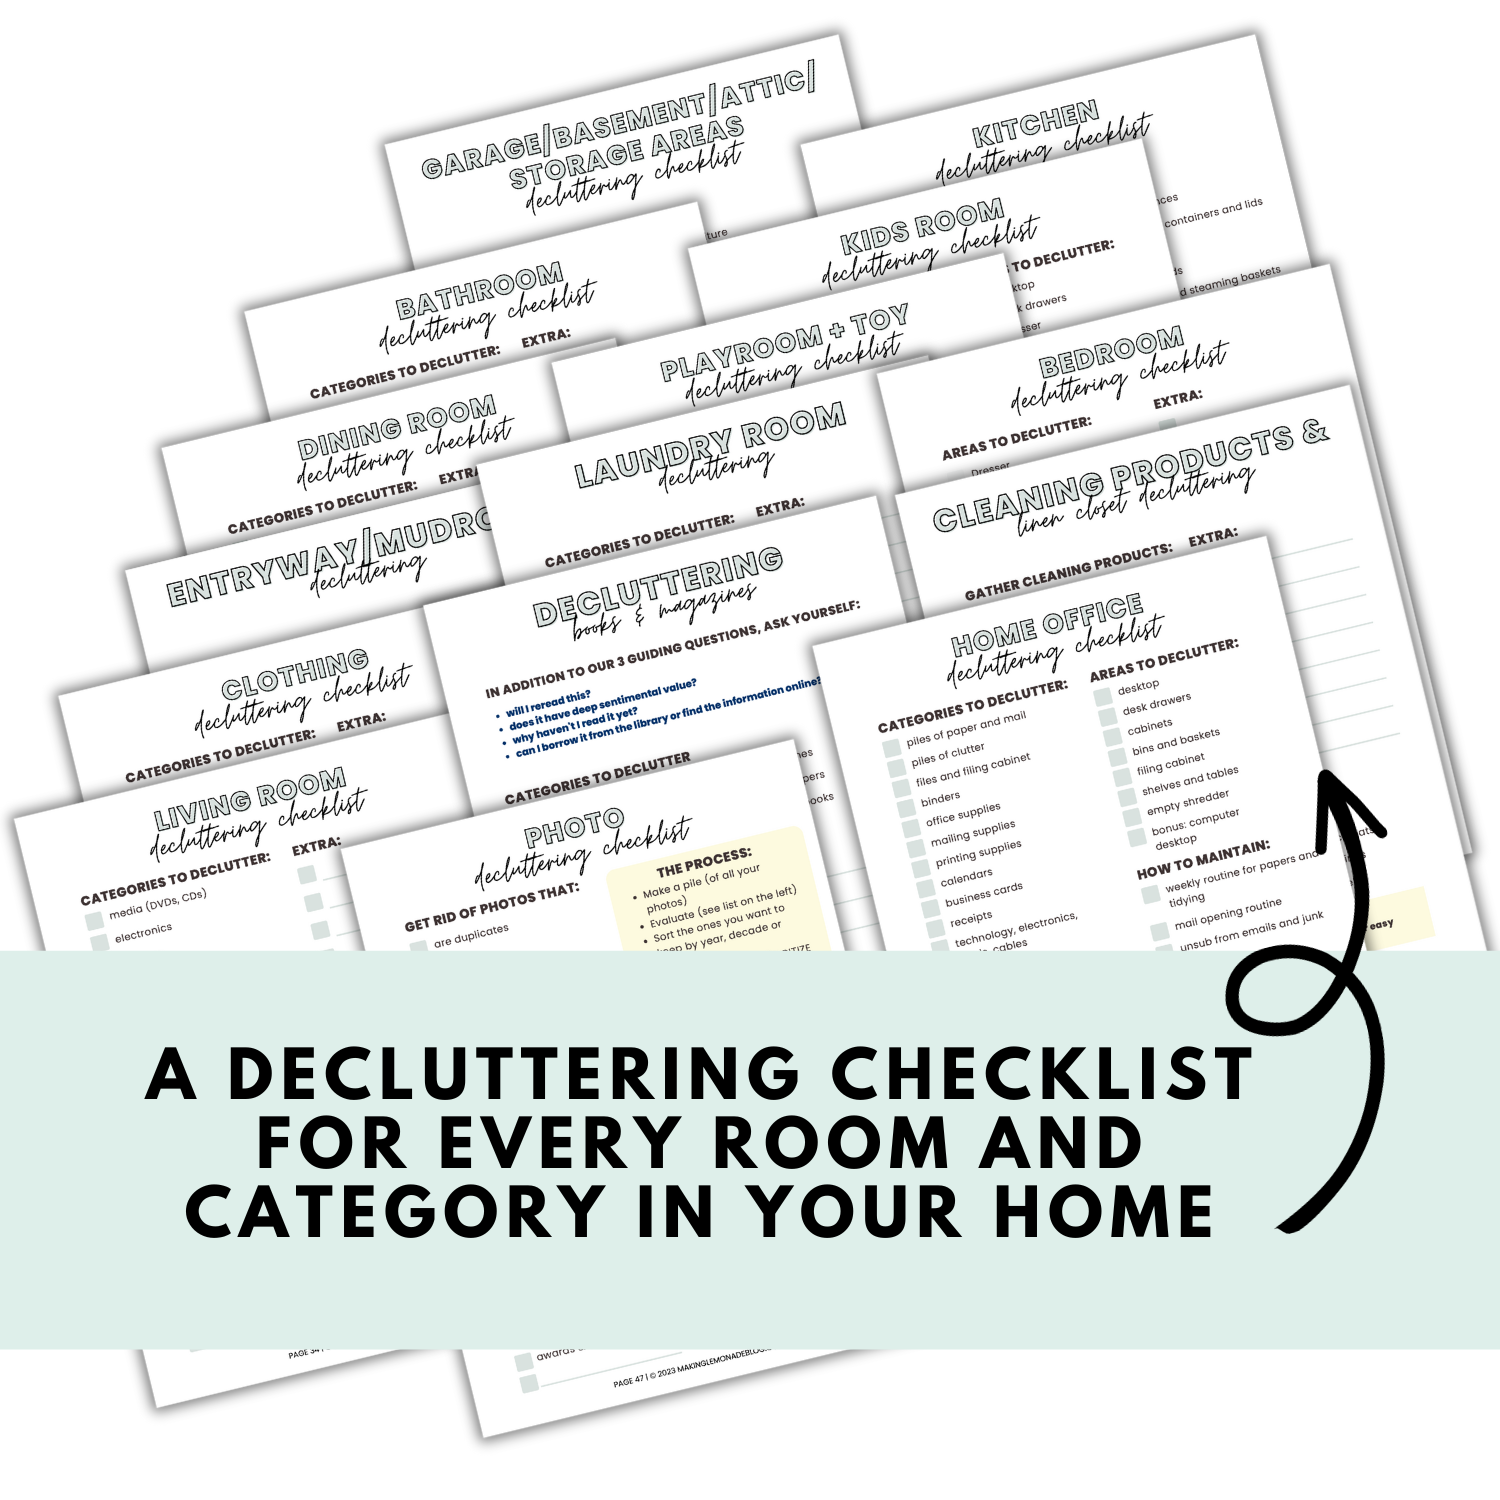 pages inside the decluttering made easy workbook including checklists for every room in your home.